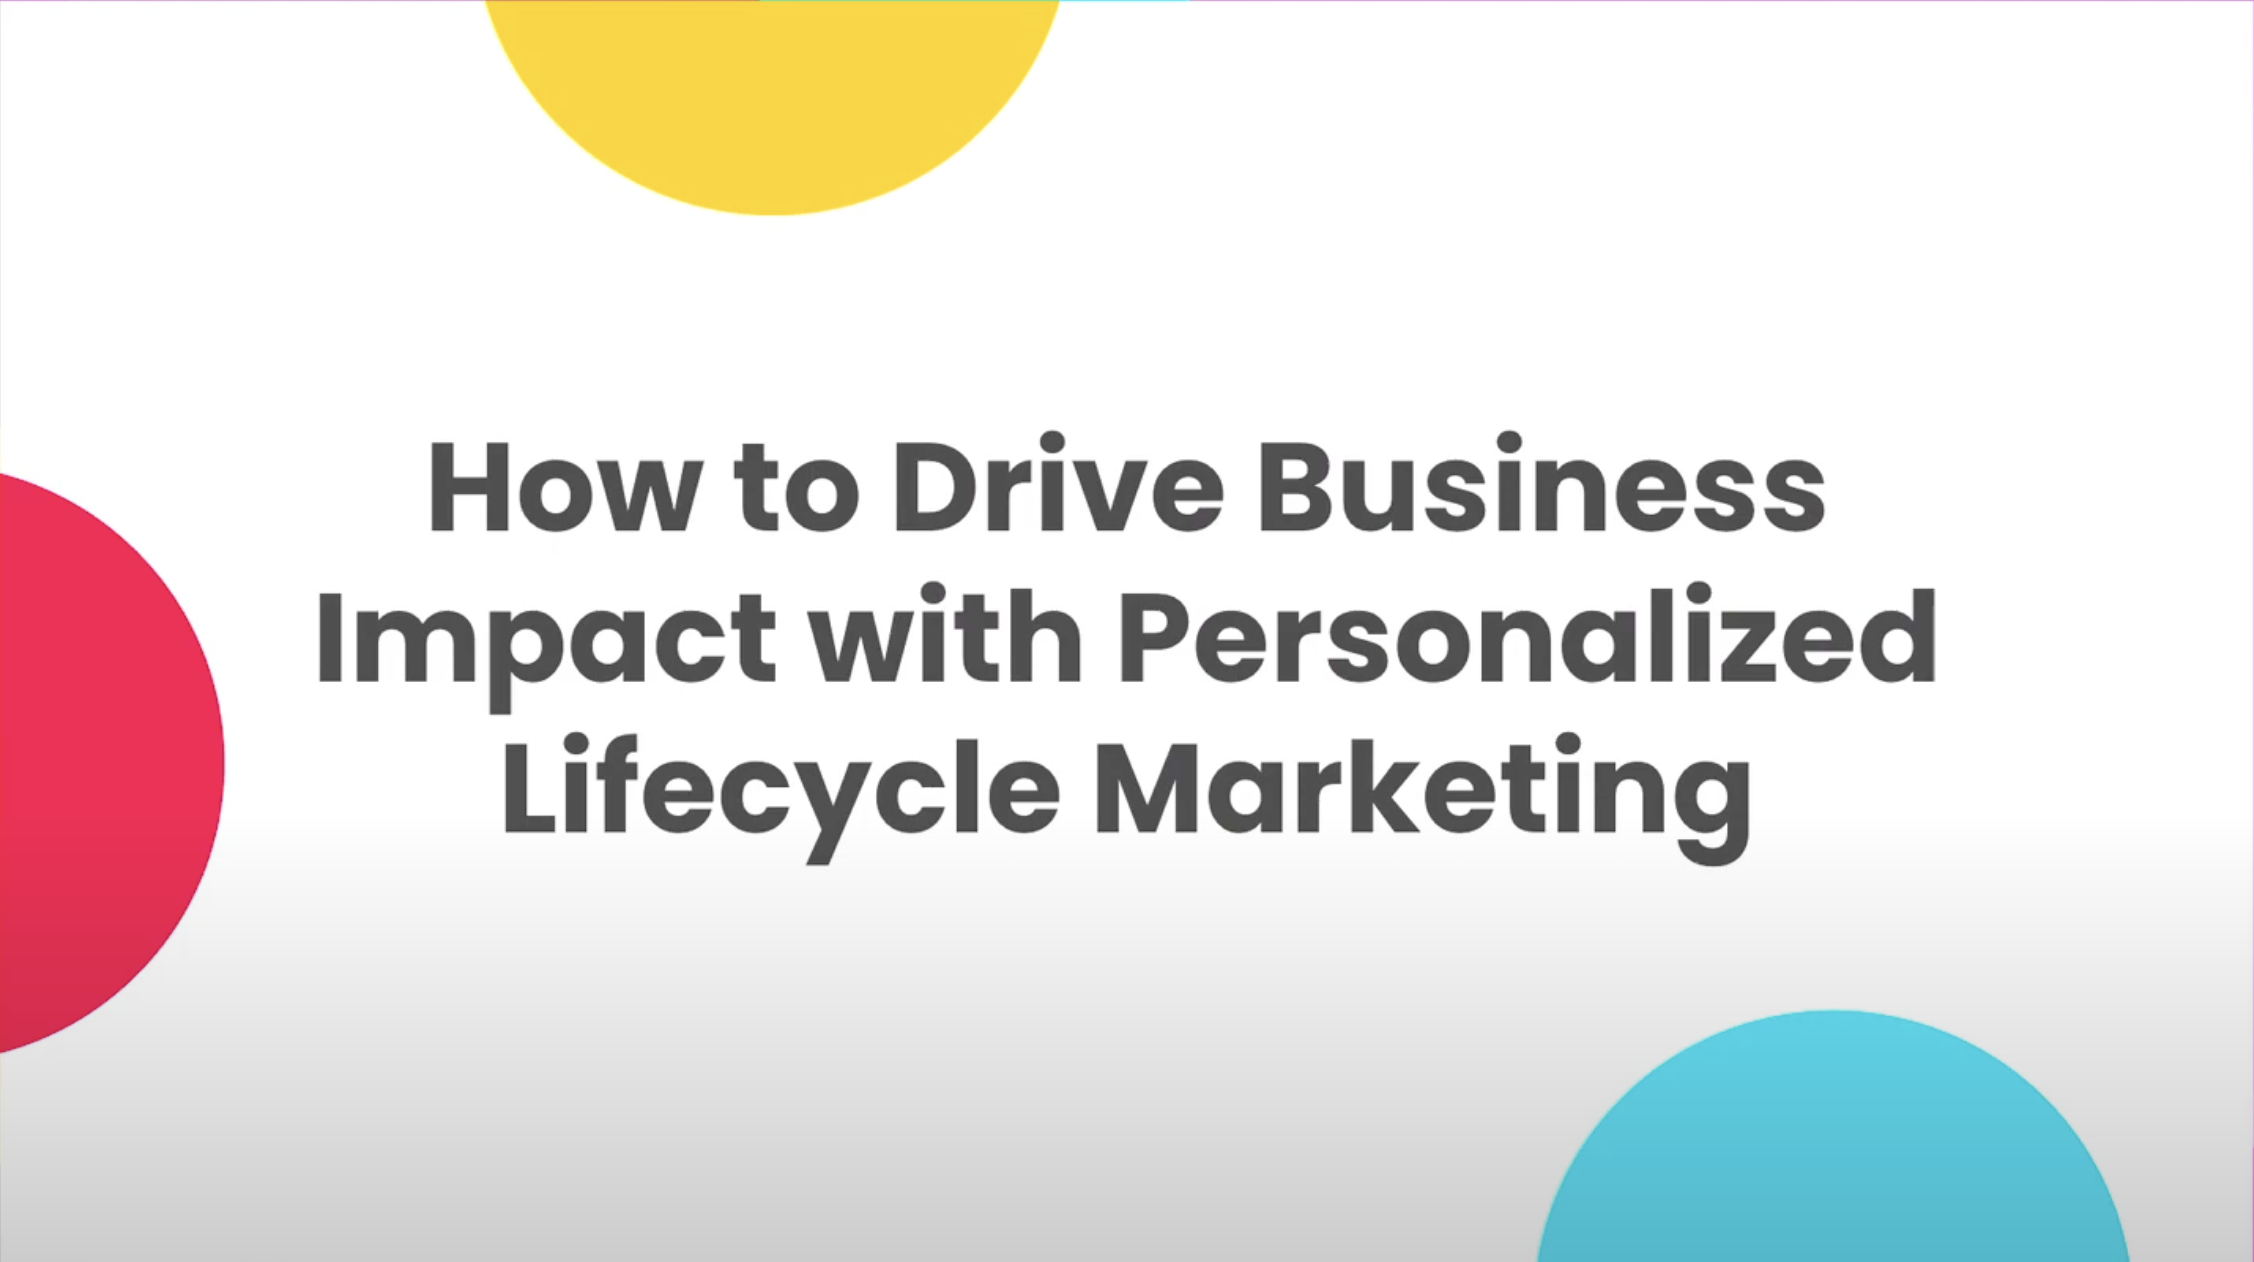 How to Drive Business Impact with Personalized Lifecycle Marketing